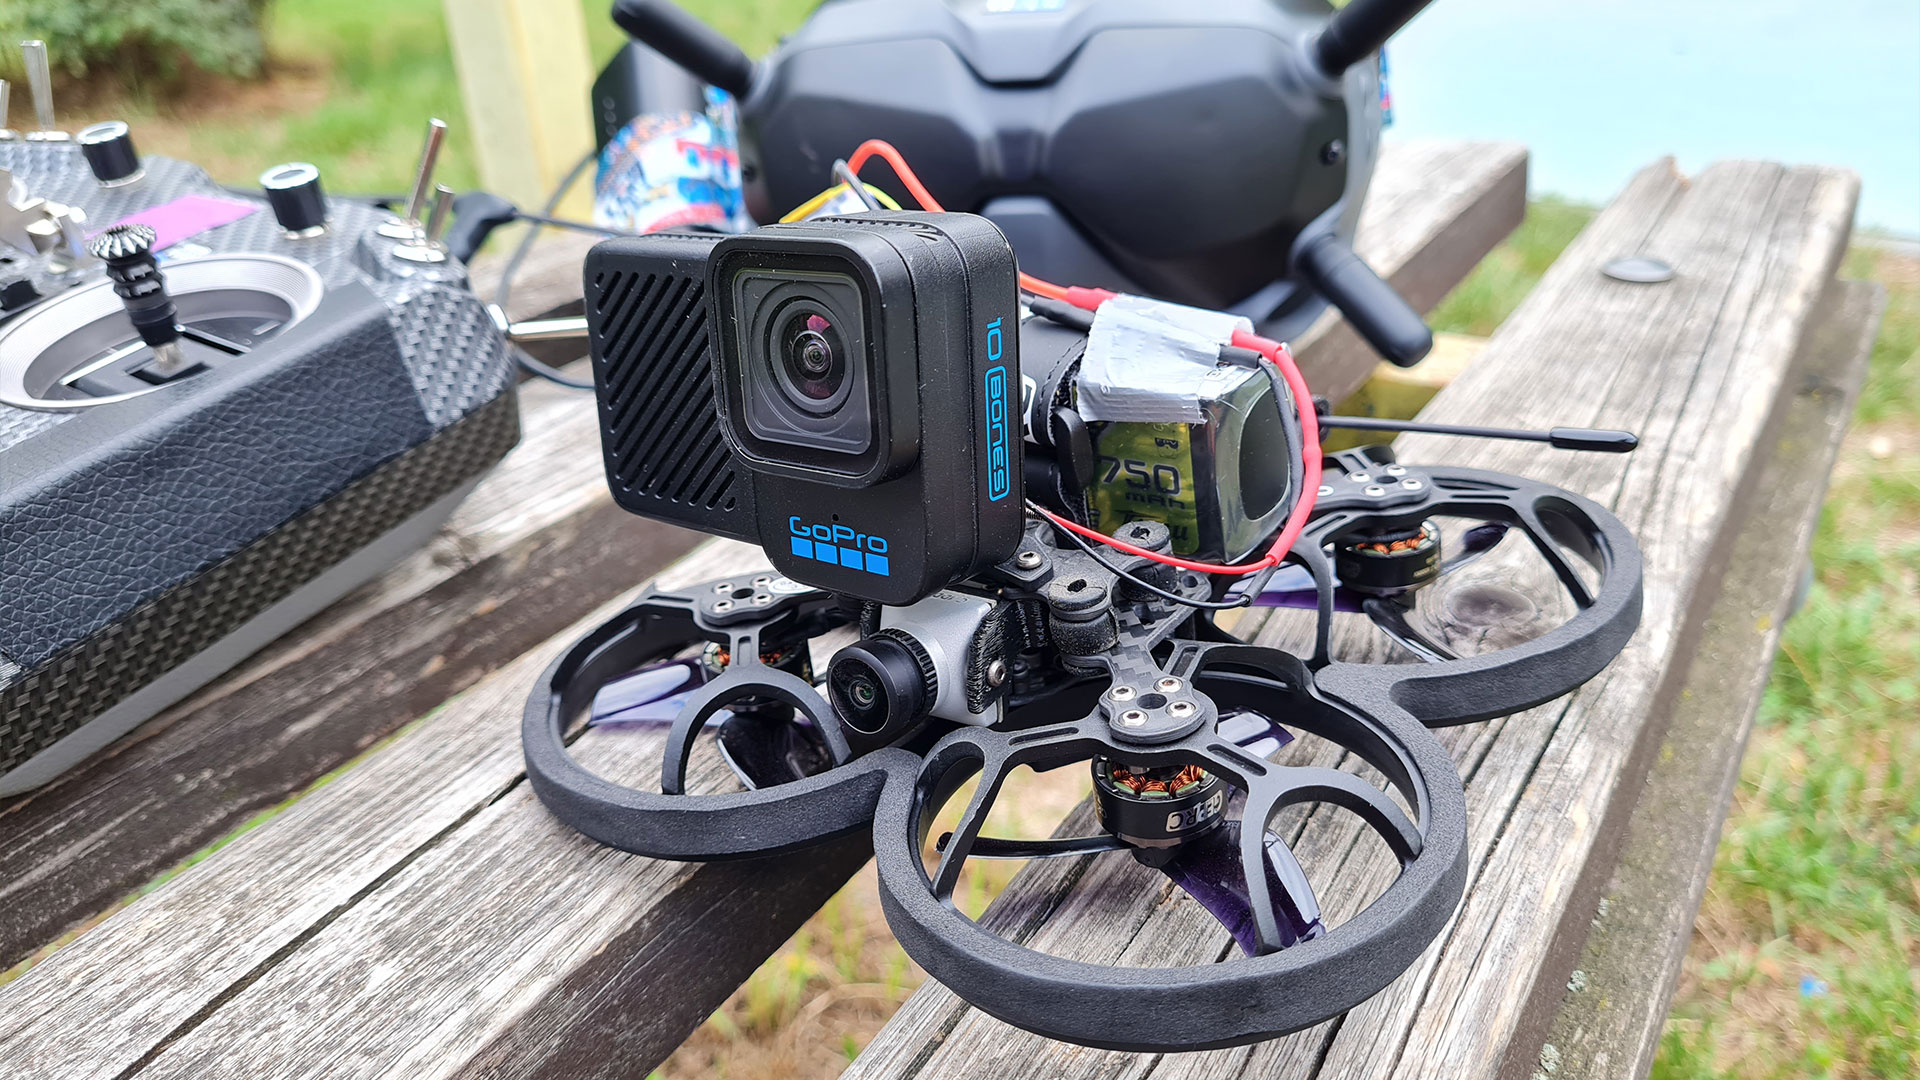 The Present and Future of Lightweight FPV Drone Cameras